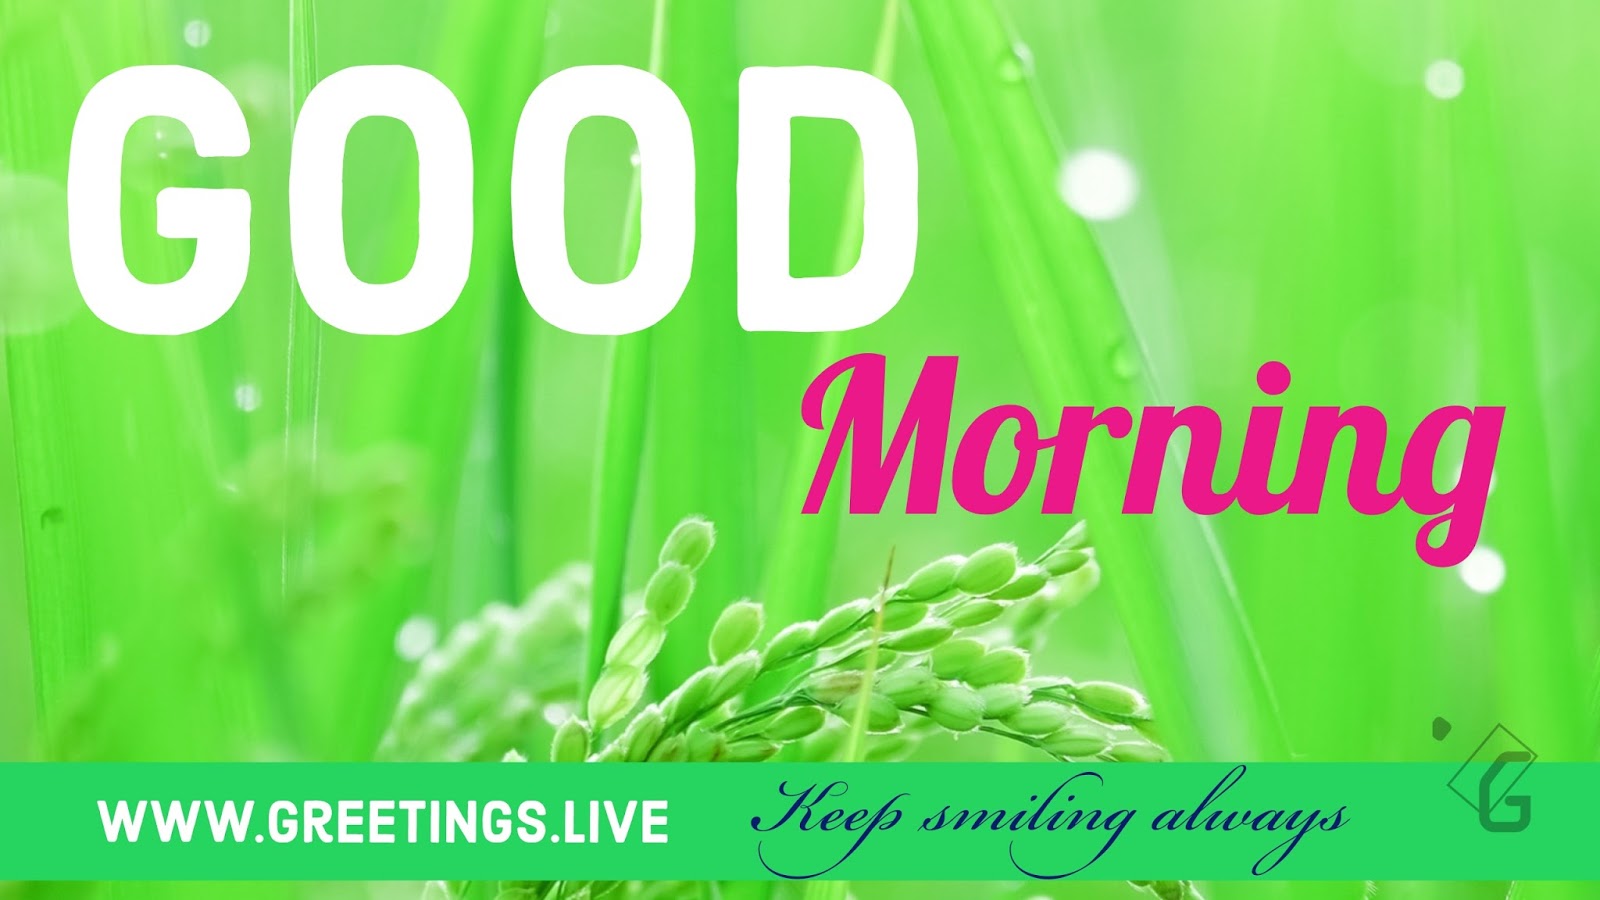 Greetings.Live*Free Daily Greetings Pictures Festival GIF Images ...